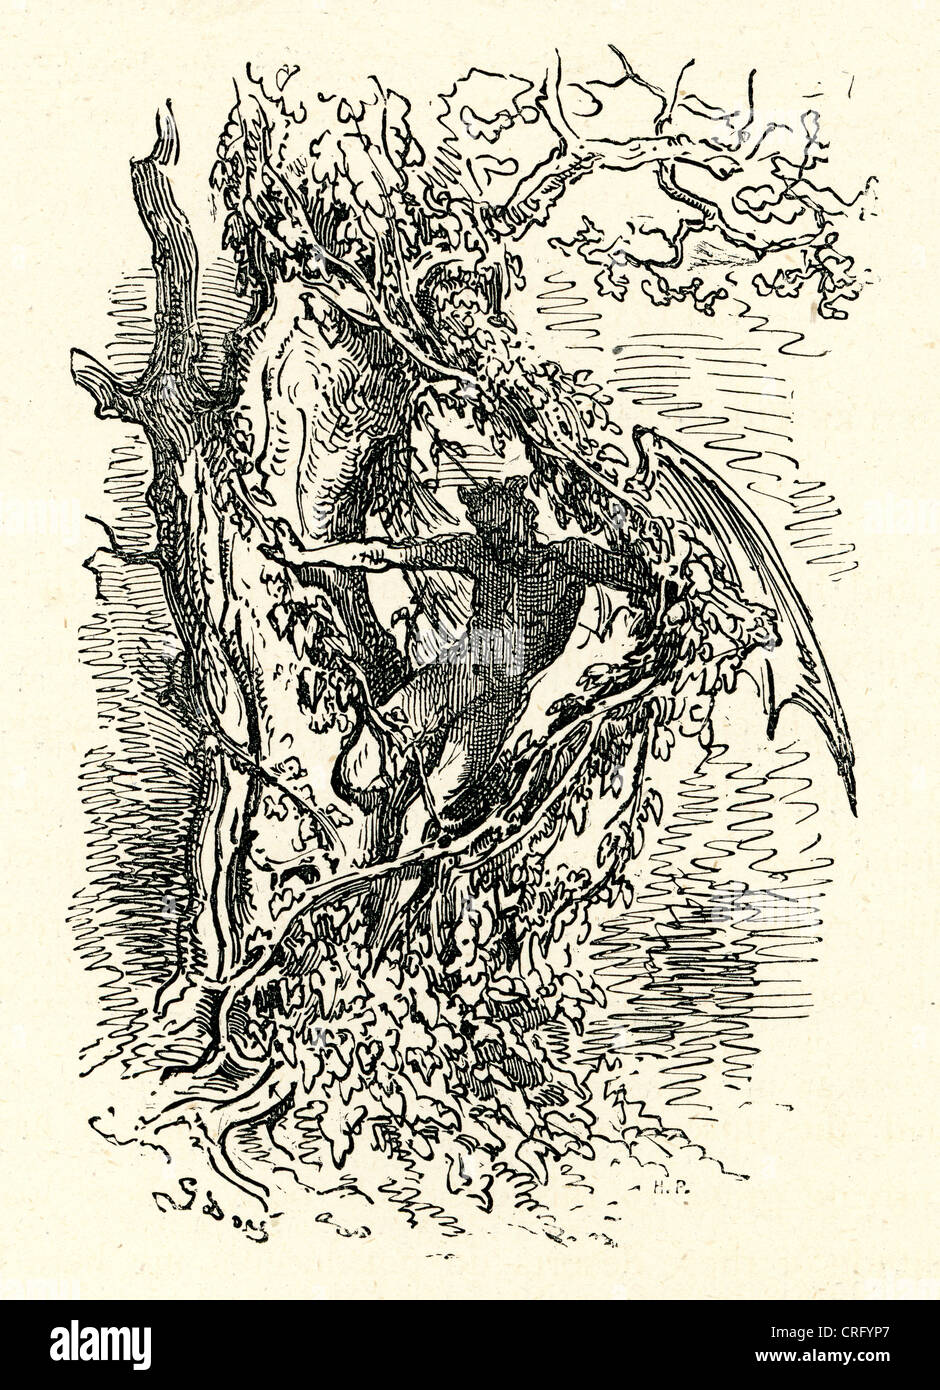 Devil in the tree. Illustration by Gustave Dore from Don Quixote. Stock Photo